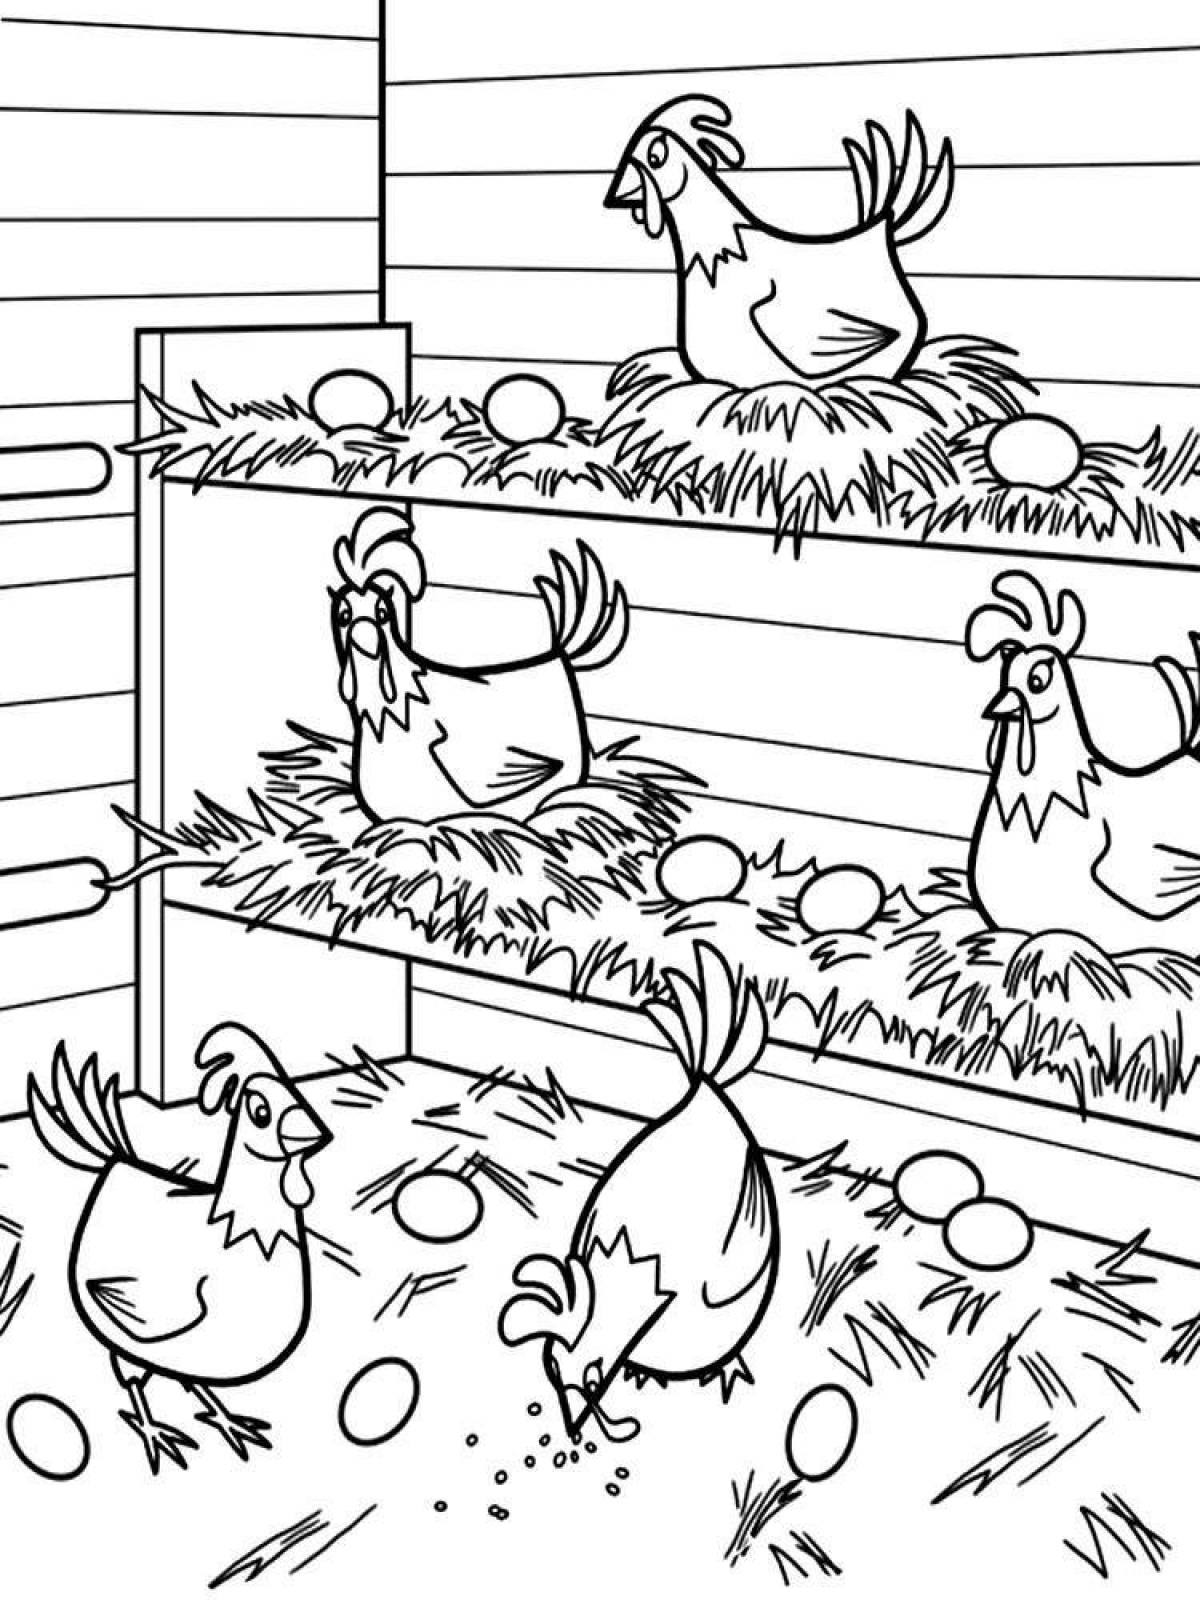 Exciting poultry coloring page for kids